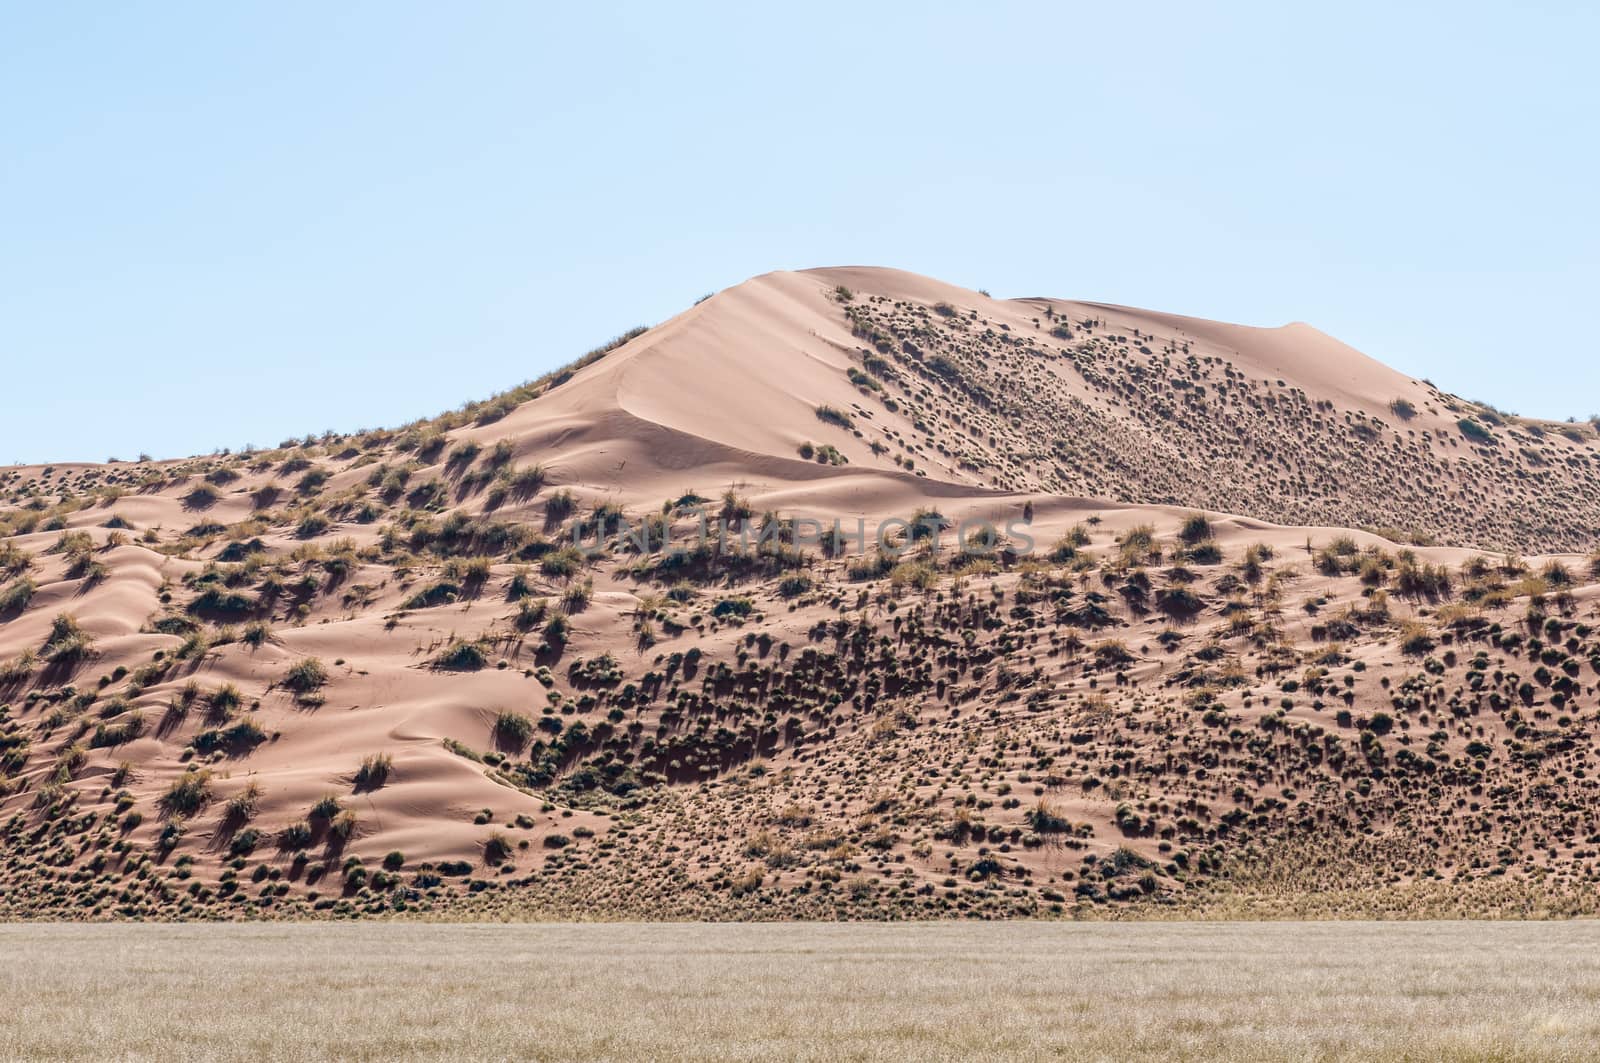 A sand dune, overgrown with bushes, near Sossusvlei